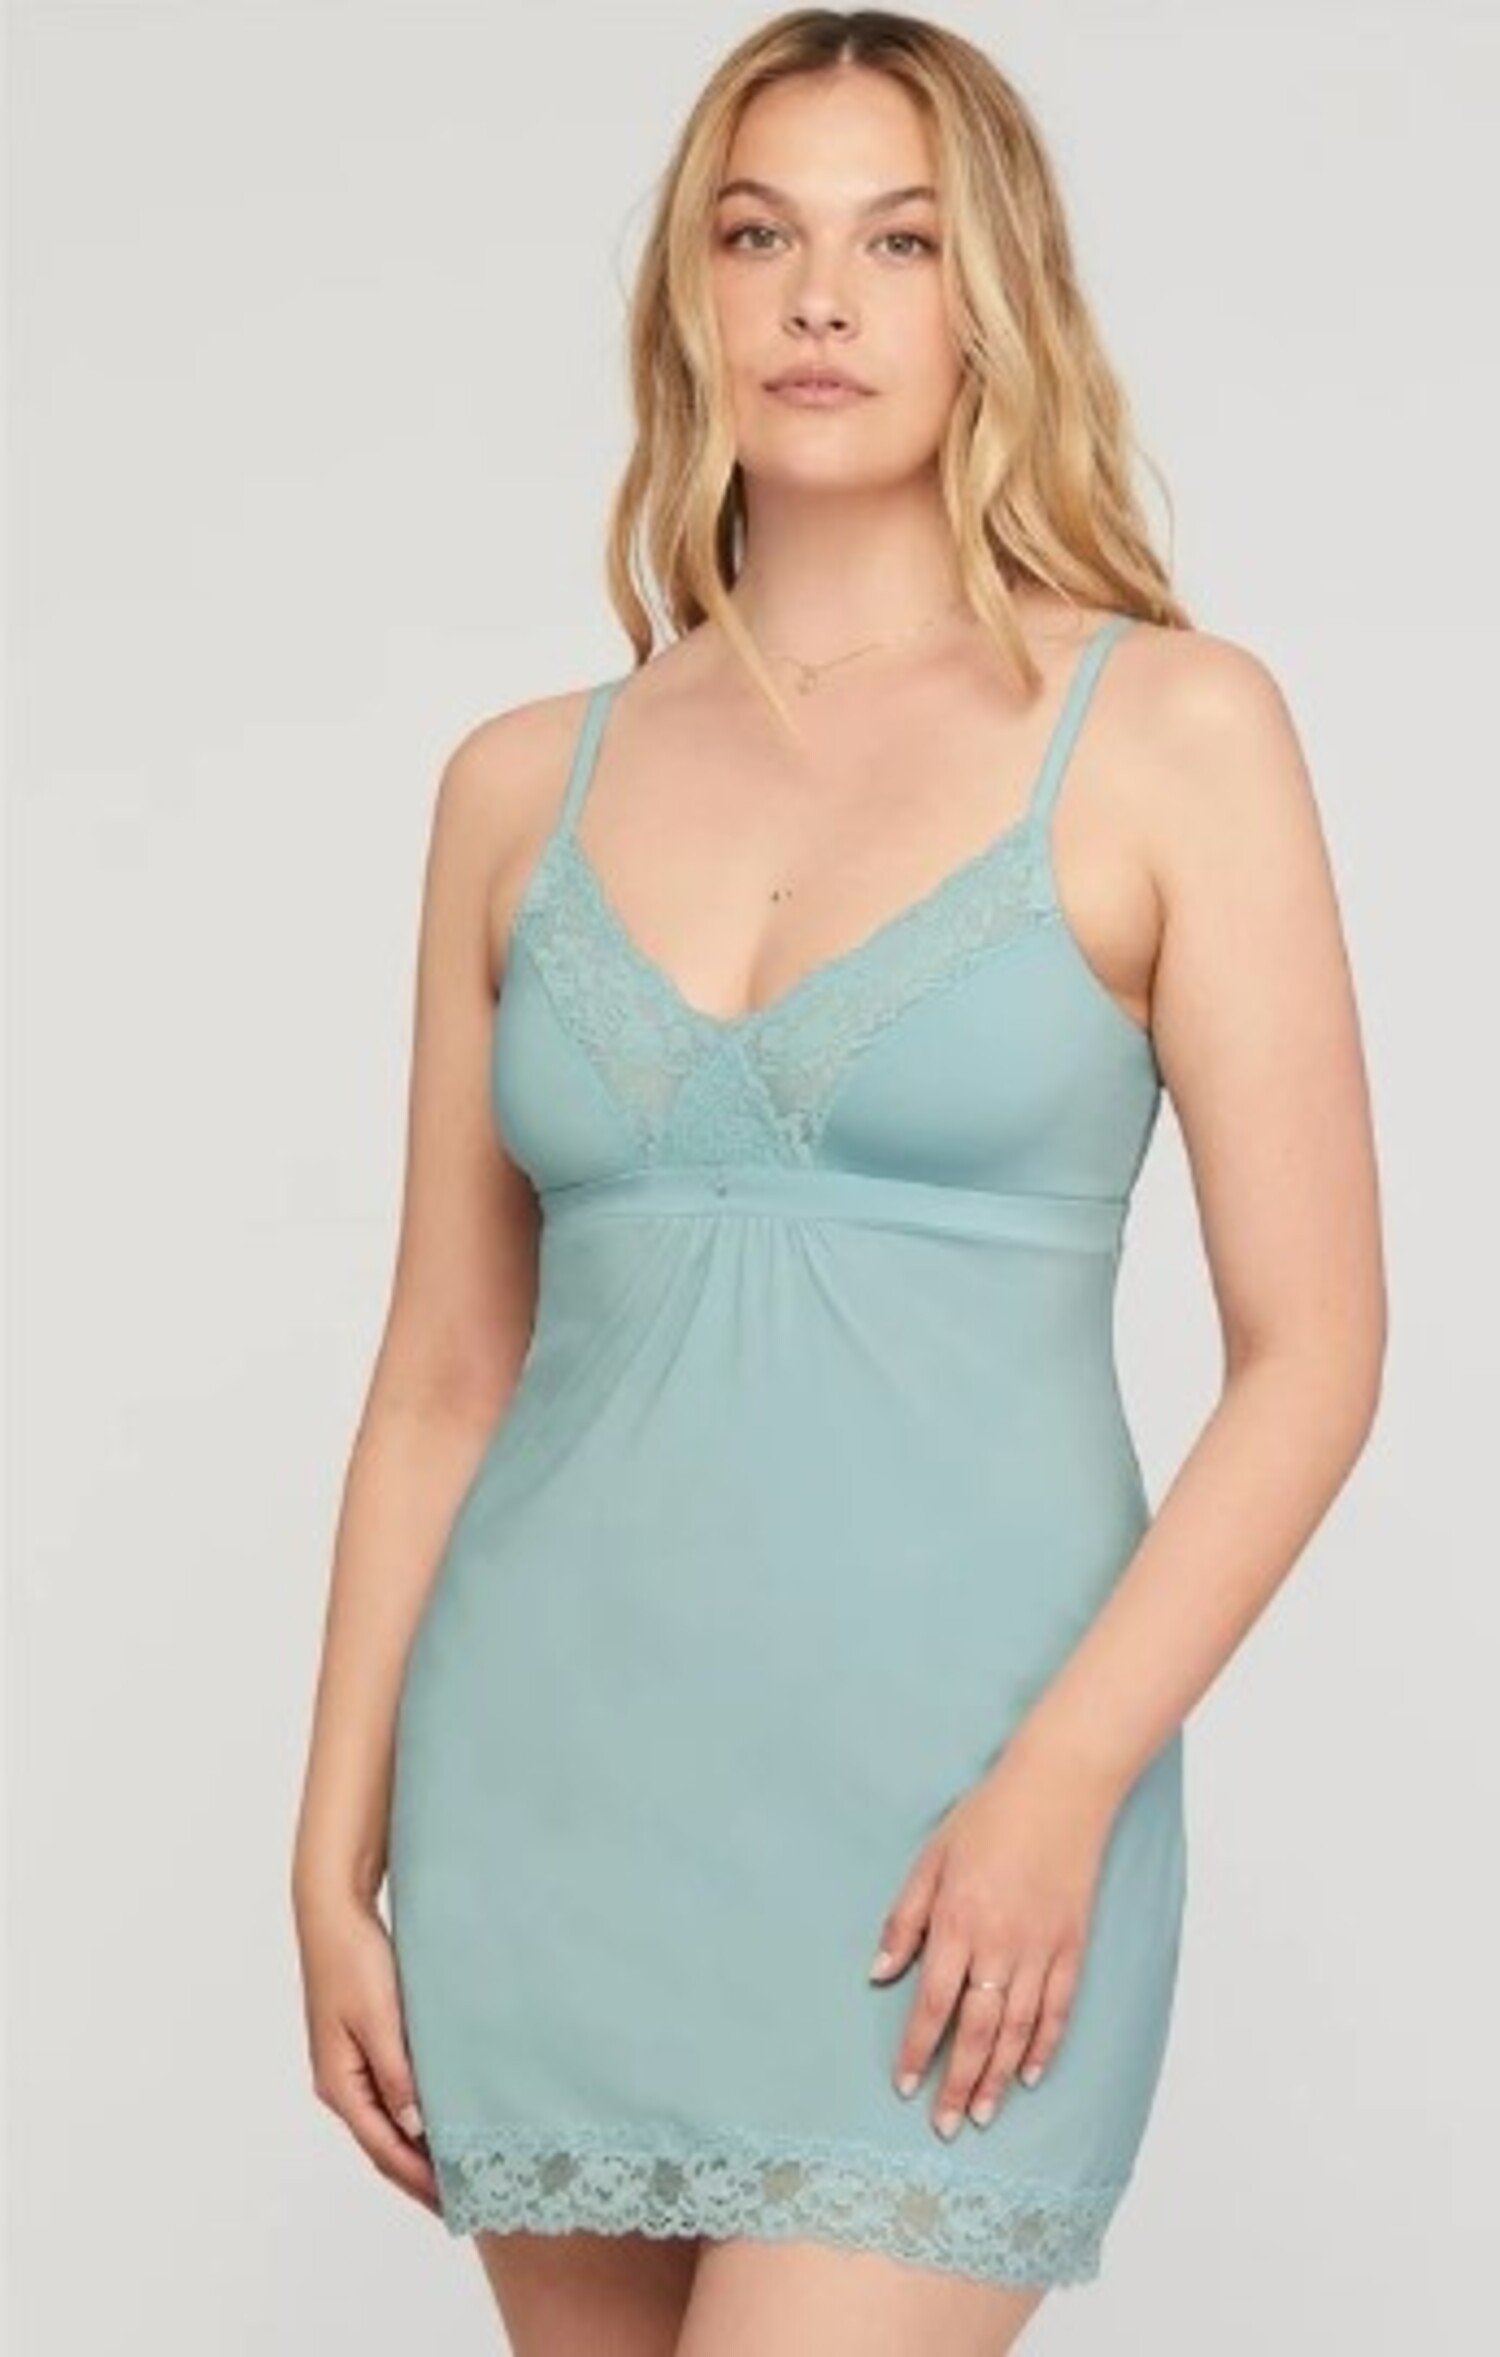 Montelle - Full Bust Lace Chemise Support - 9394F - The Bra Spa - Bra  Fitting Experts in Tucson, AZ